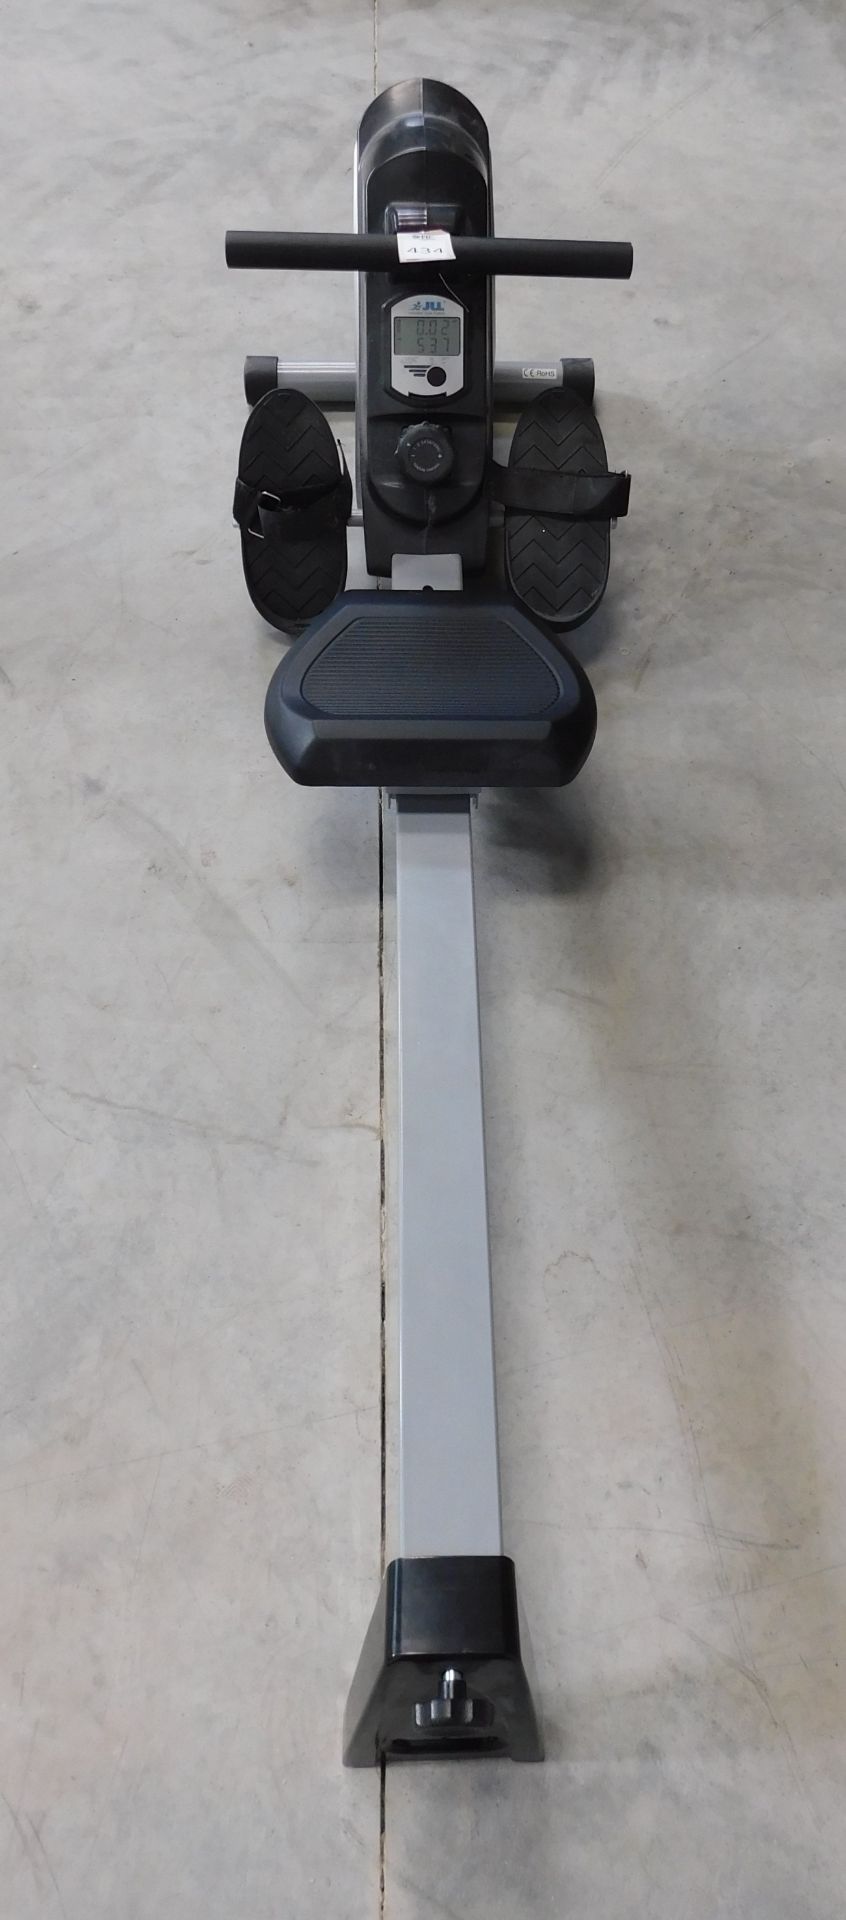 JLL R200 Home Rowing Machine (Located: Brentwood. Please Refer to General Notes)